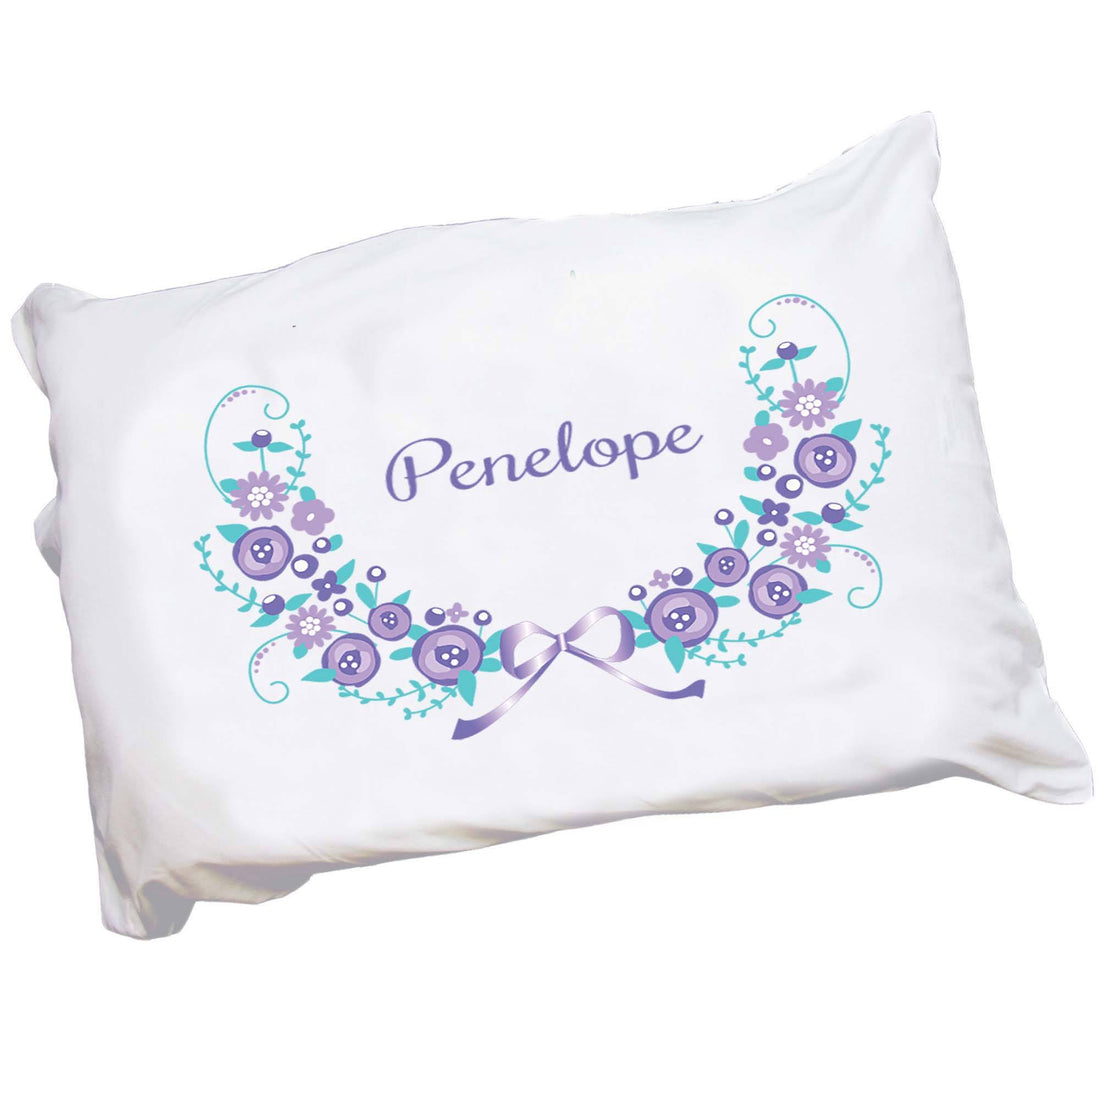 Personalized Childrens Pillowcase with Lavender Floral Garland design